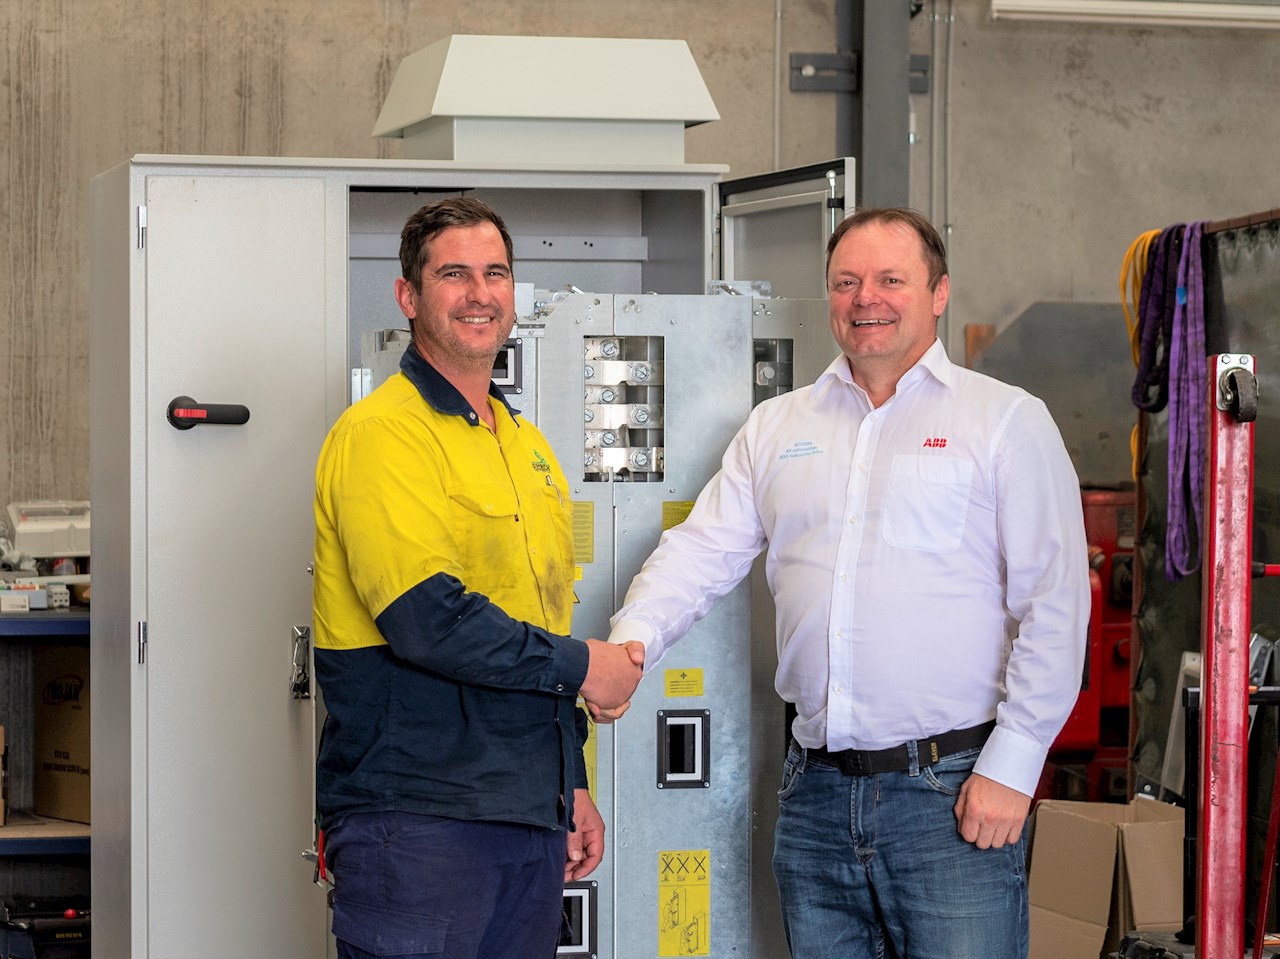 ABB Australia representative shaking hands with A1 worker after making dea;